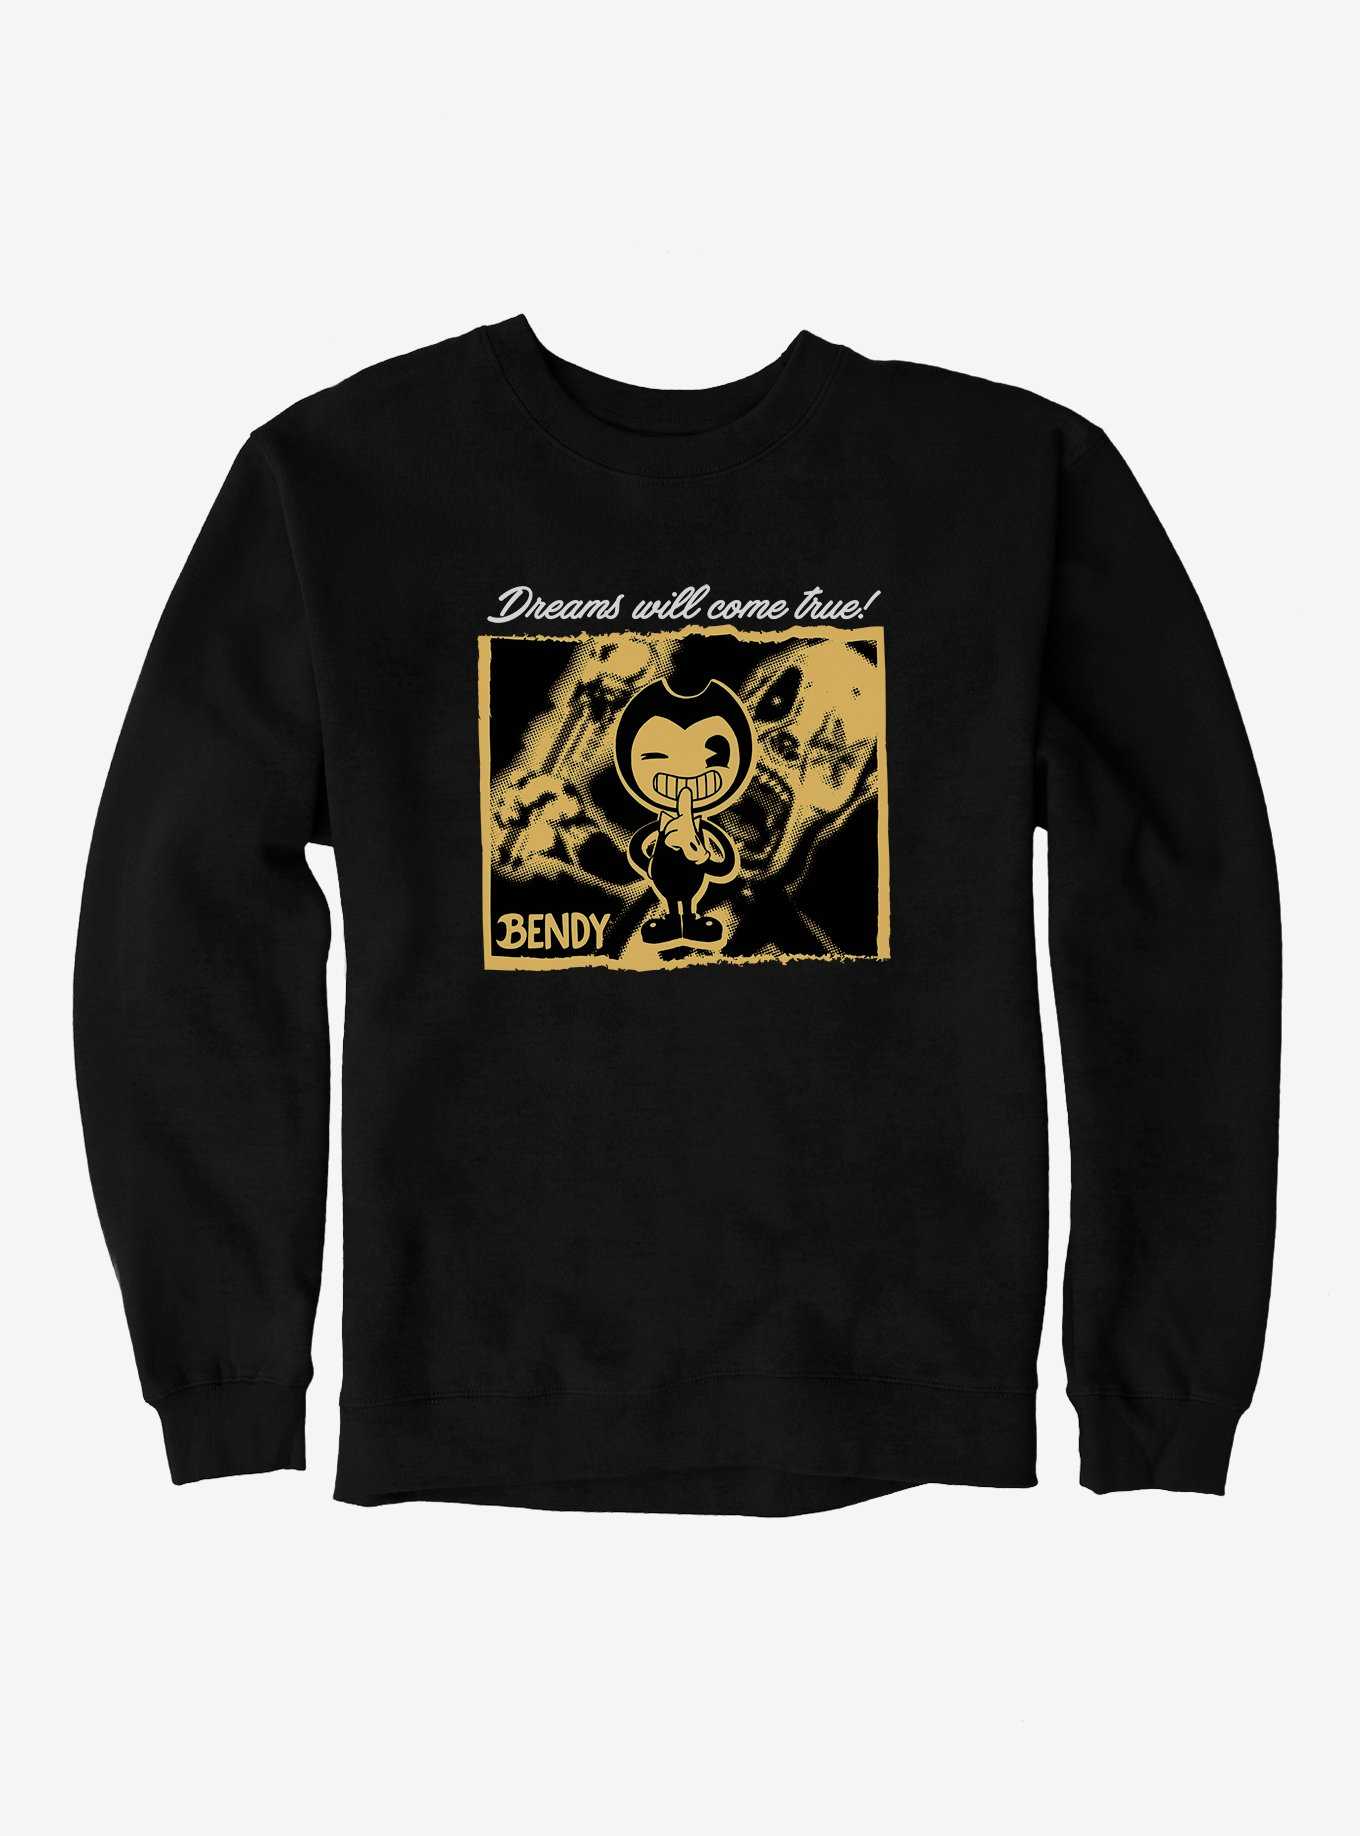 Bendy And The Ink Machine Dreams Will Come True! Sweatshirt, , hi-res